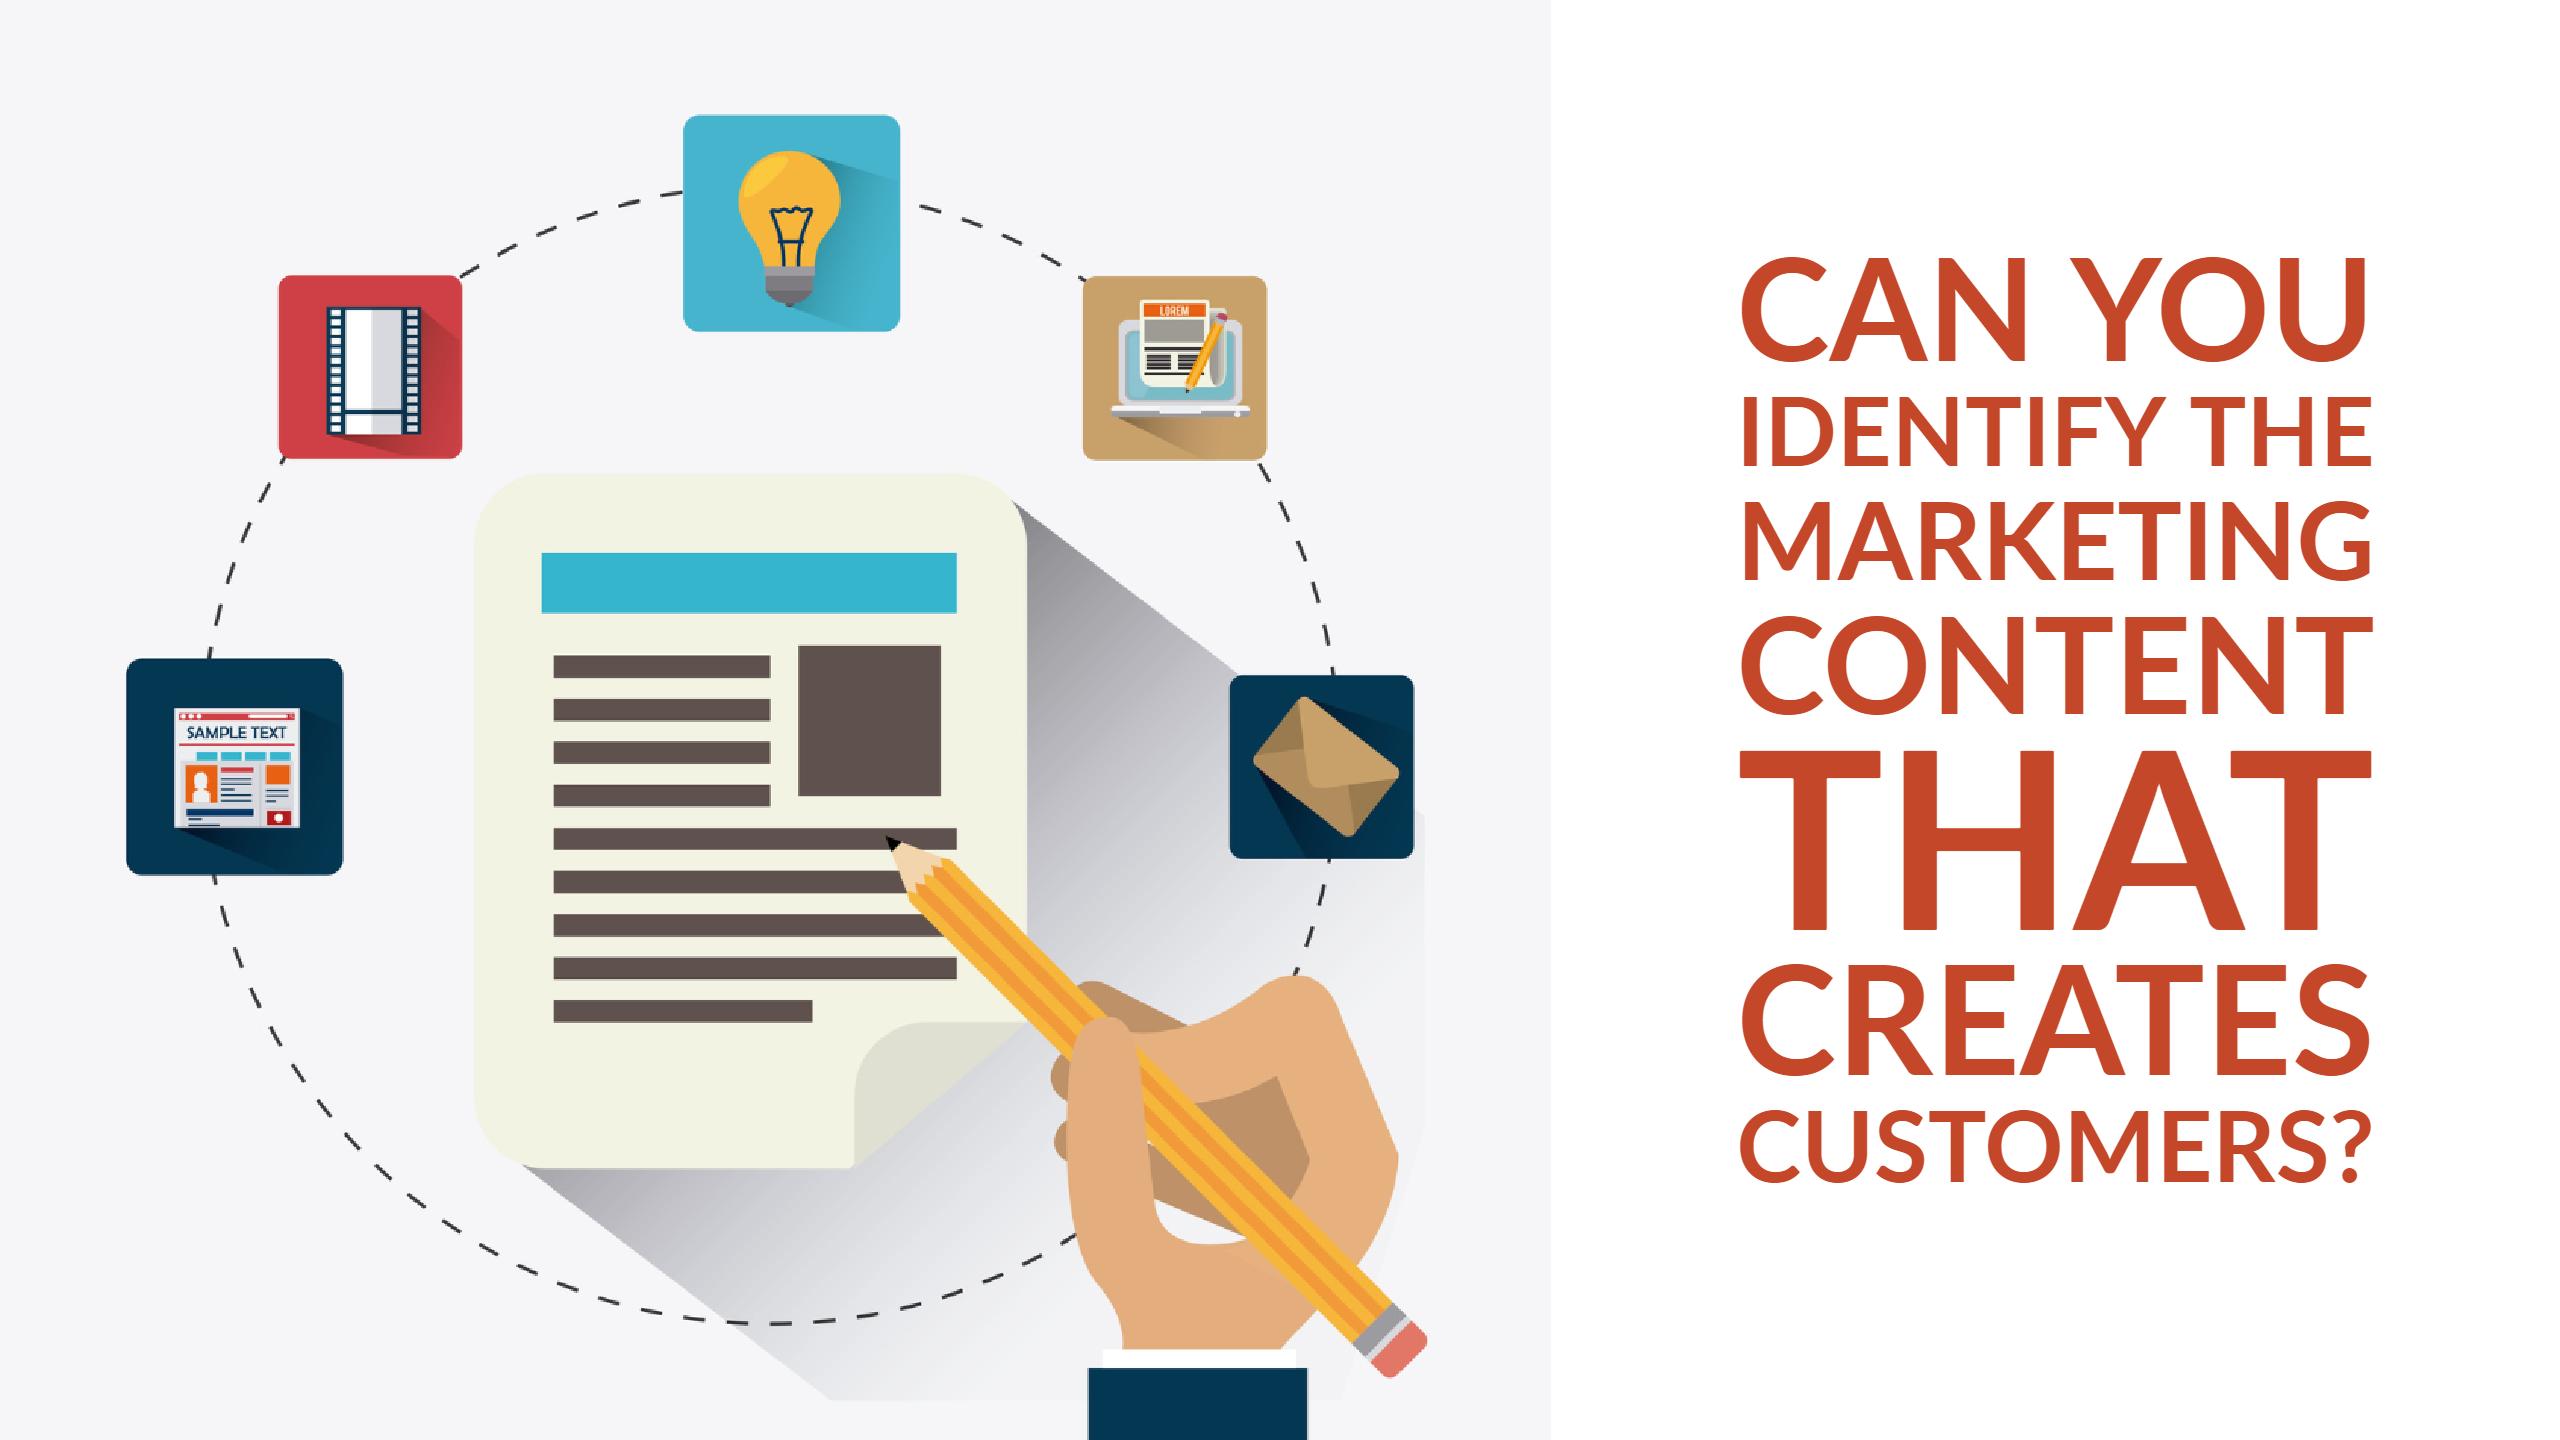 Identify the Marketing Content That Creates Customers